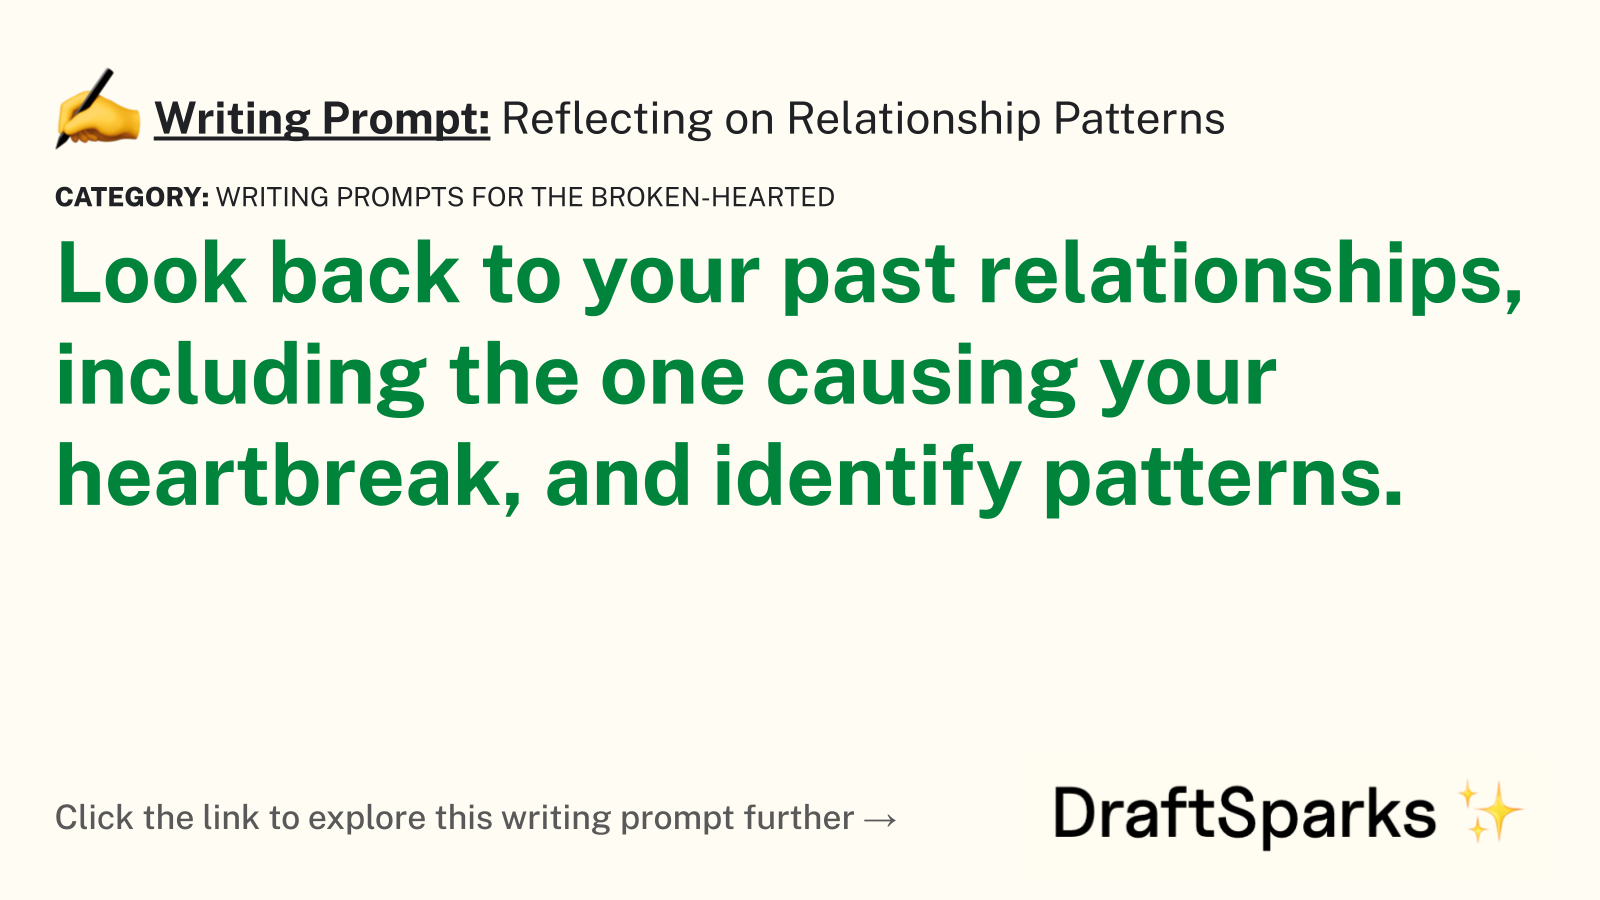 Reflecting on Relationship Patterns